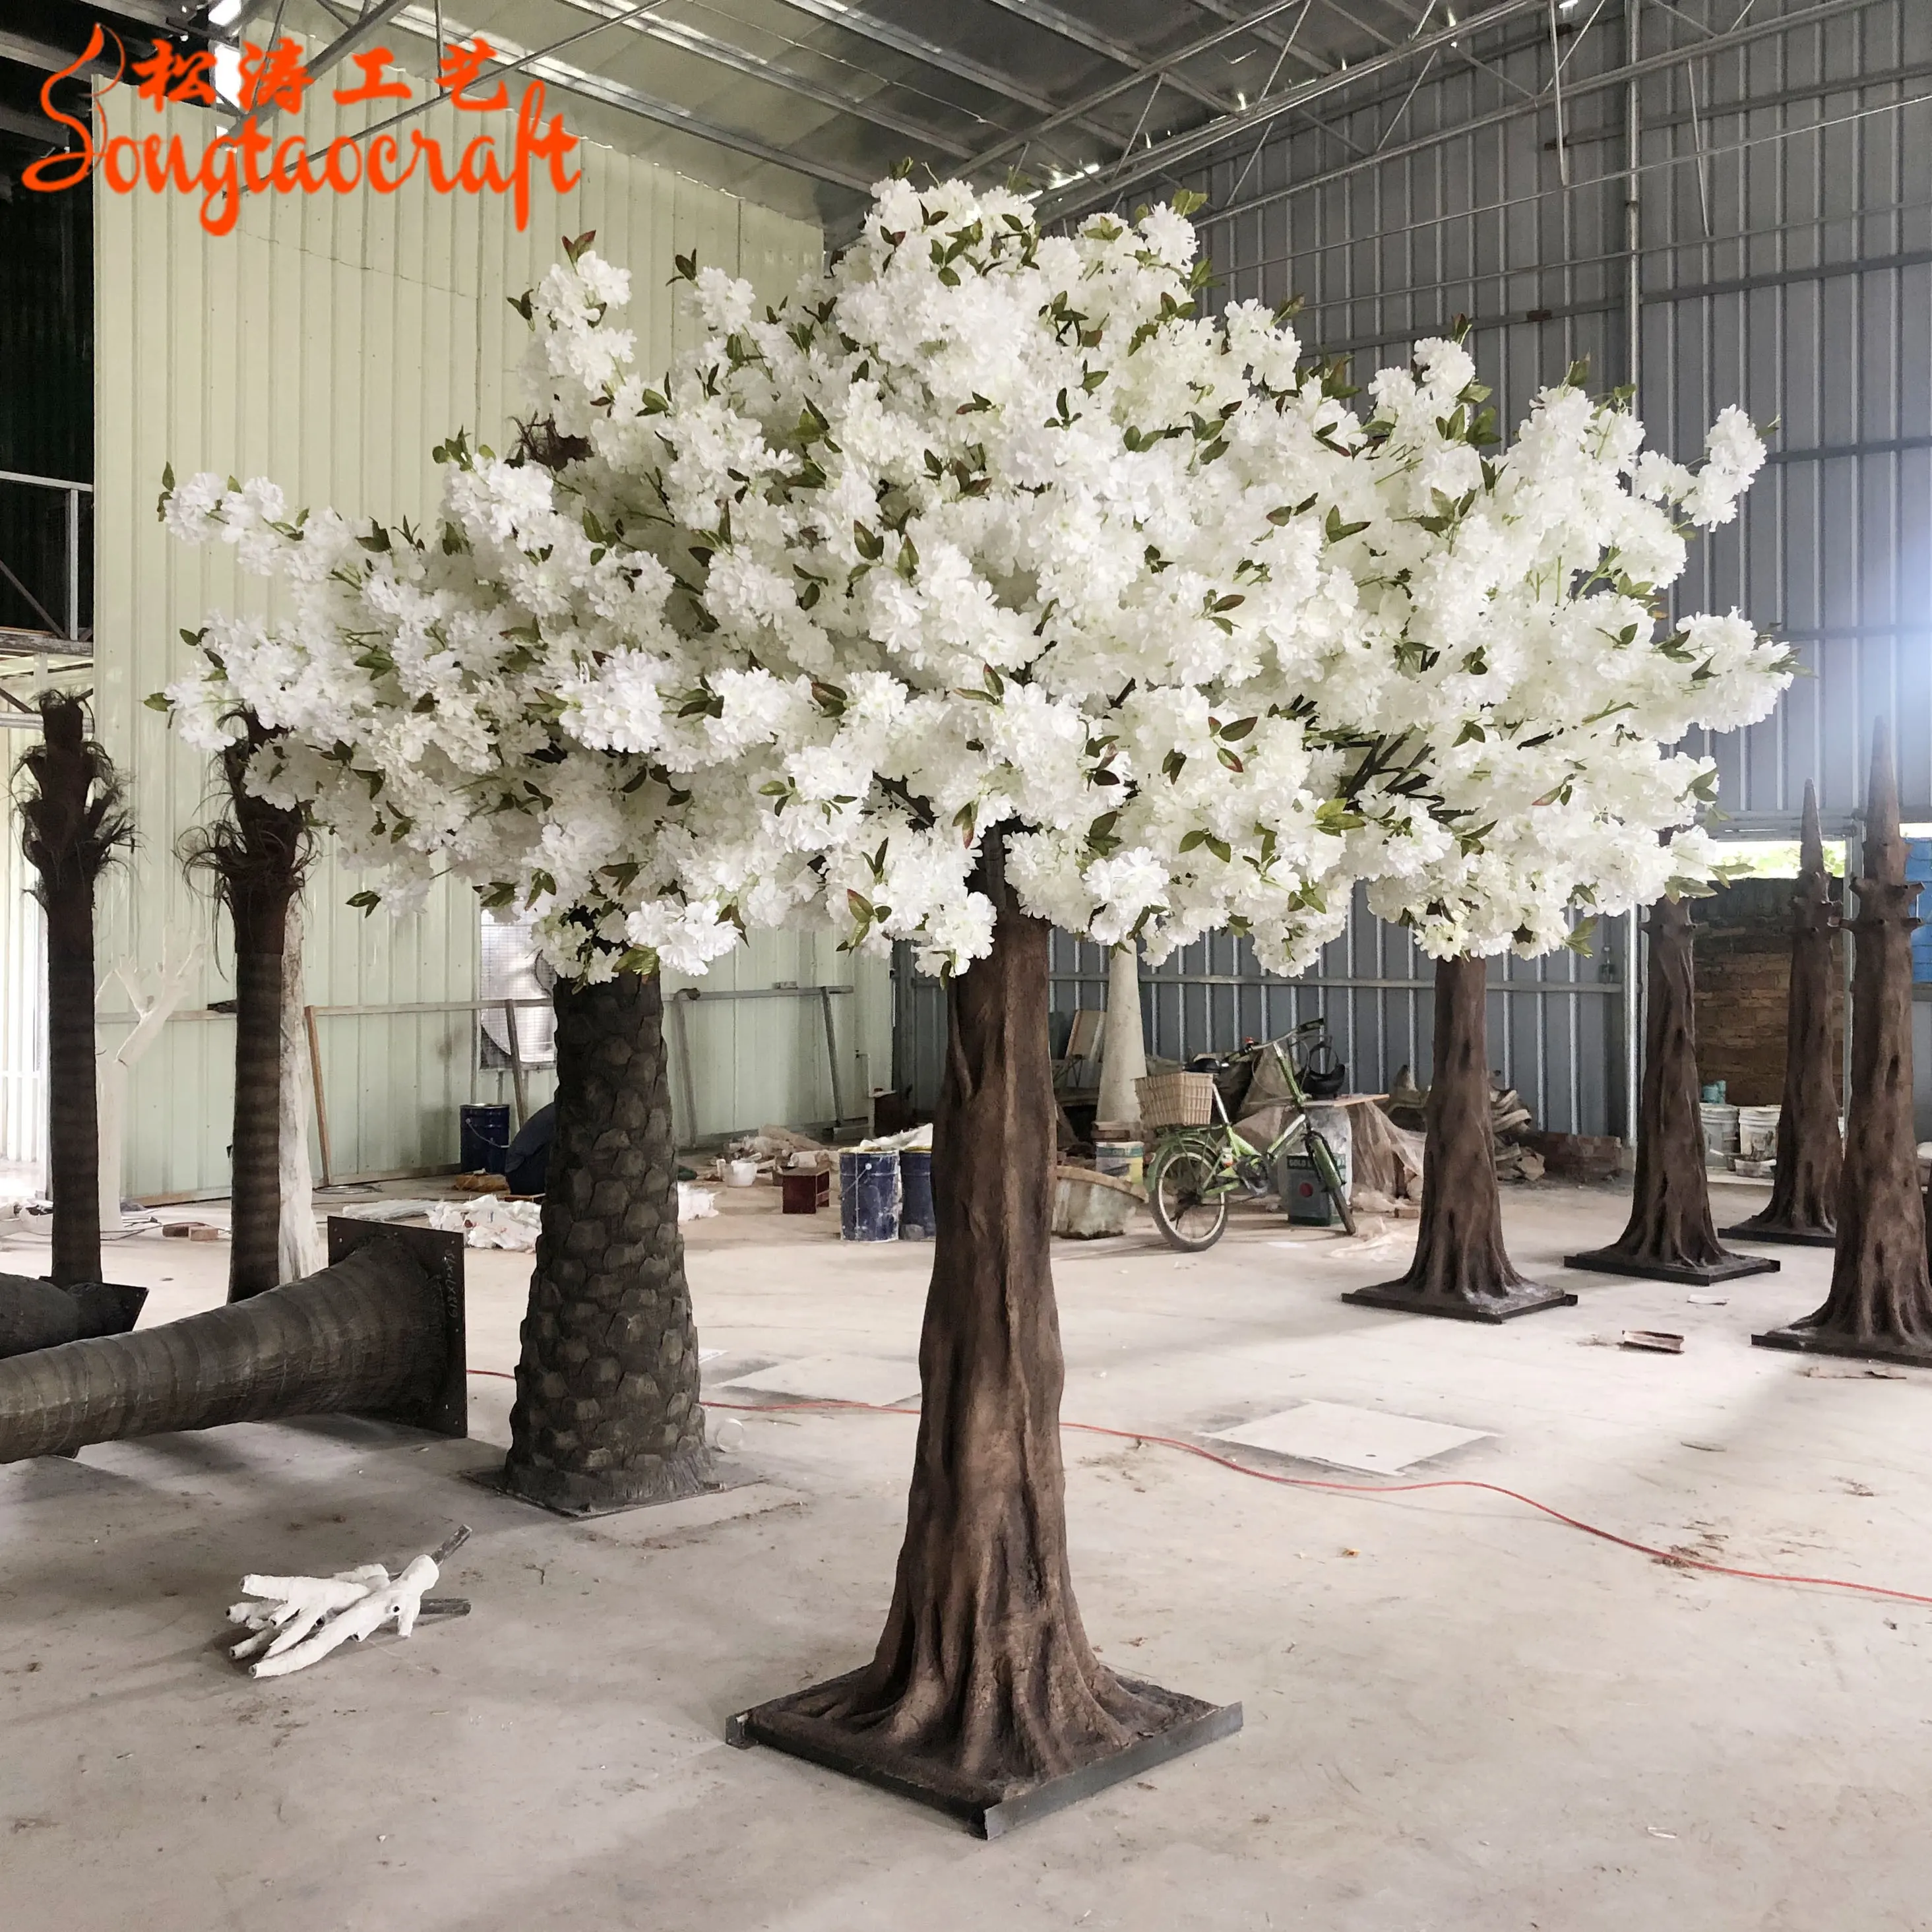 songtao Hot selling artificial cherry blossom tree Simulation cherry blossom tree artificial plant fake flower